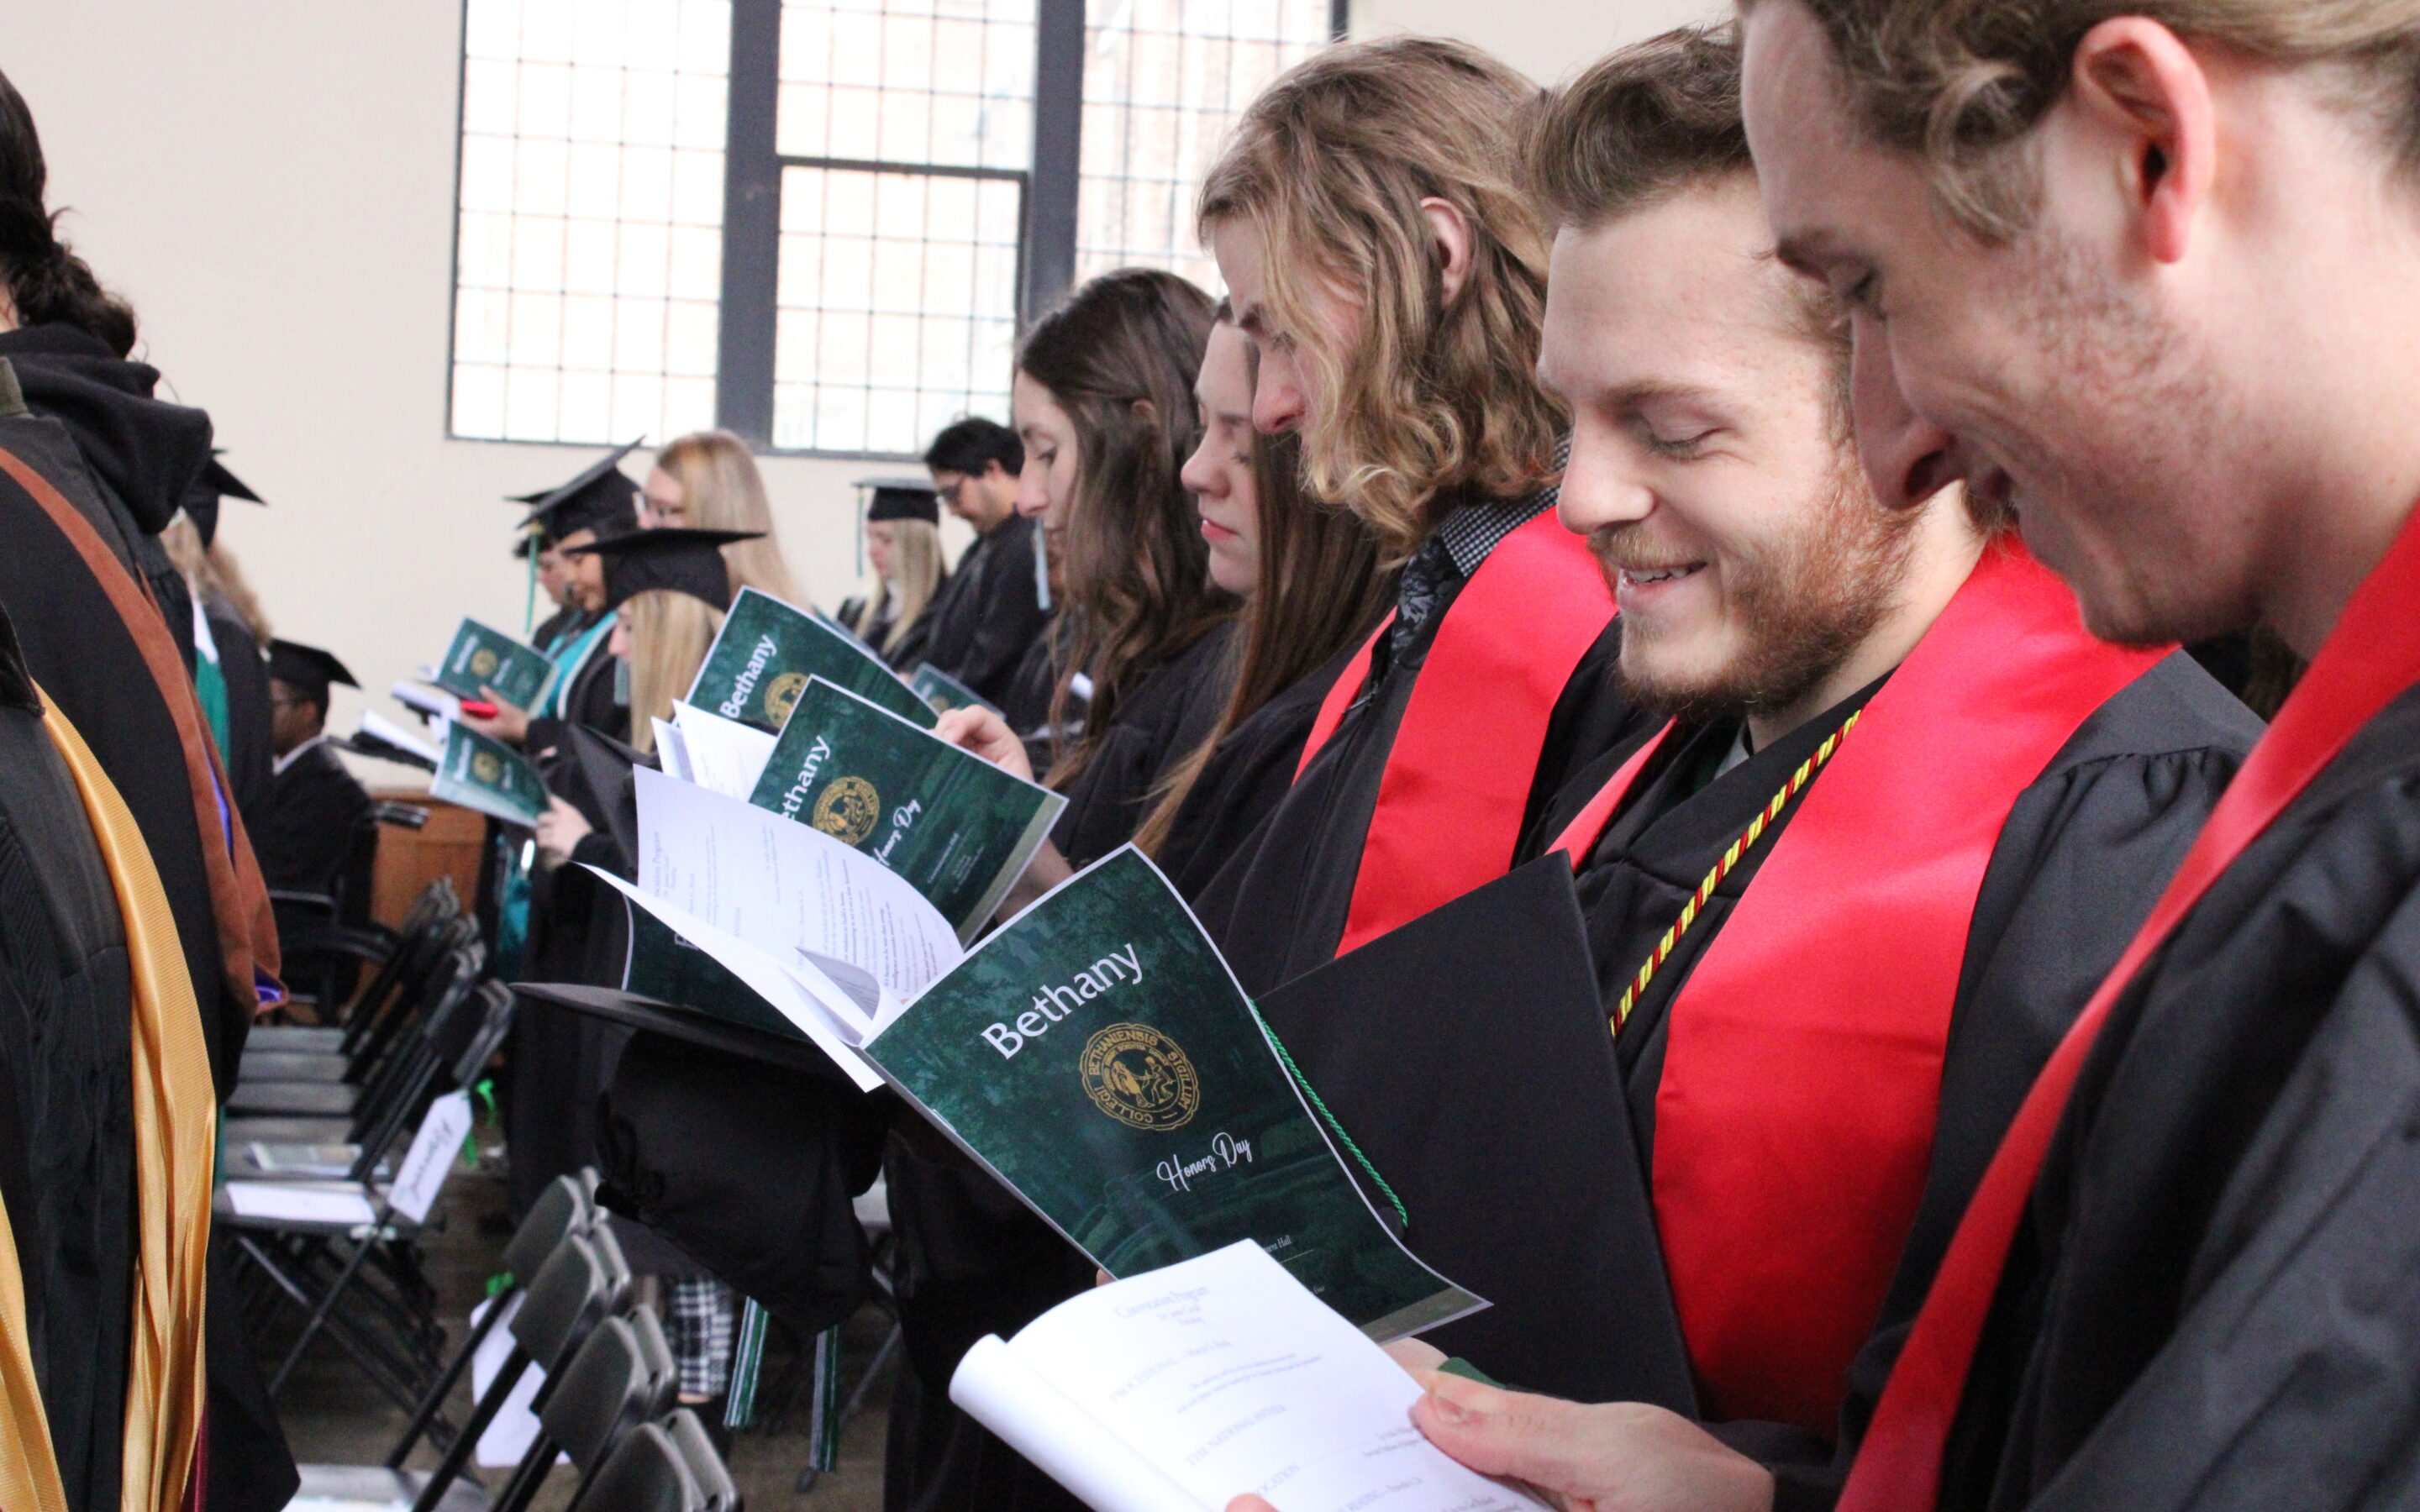 Bethany College Awards Outstanding Students During Annual Honors Day Ceremony